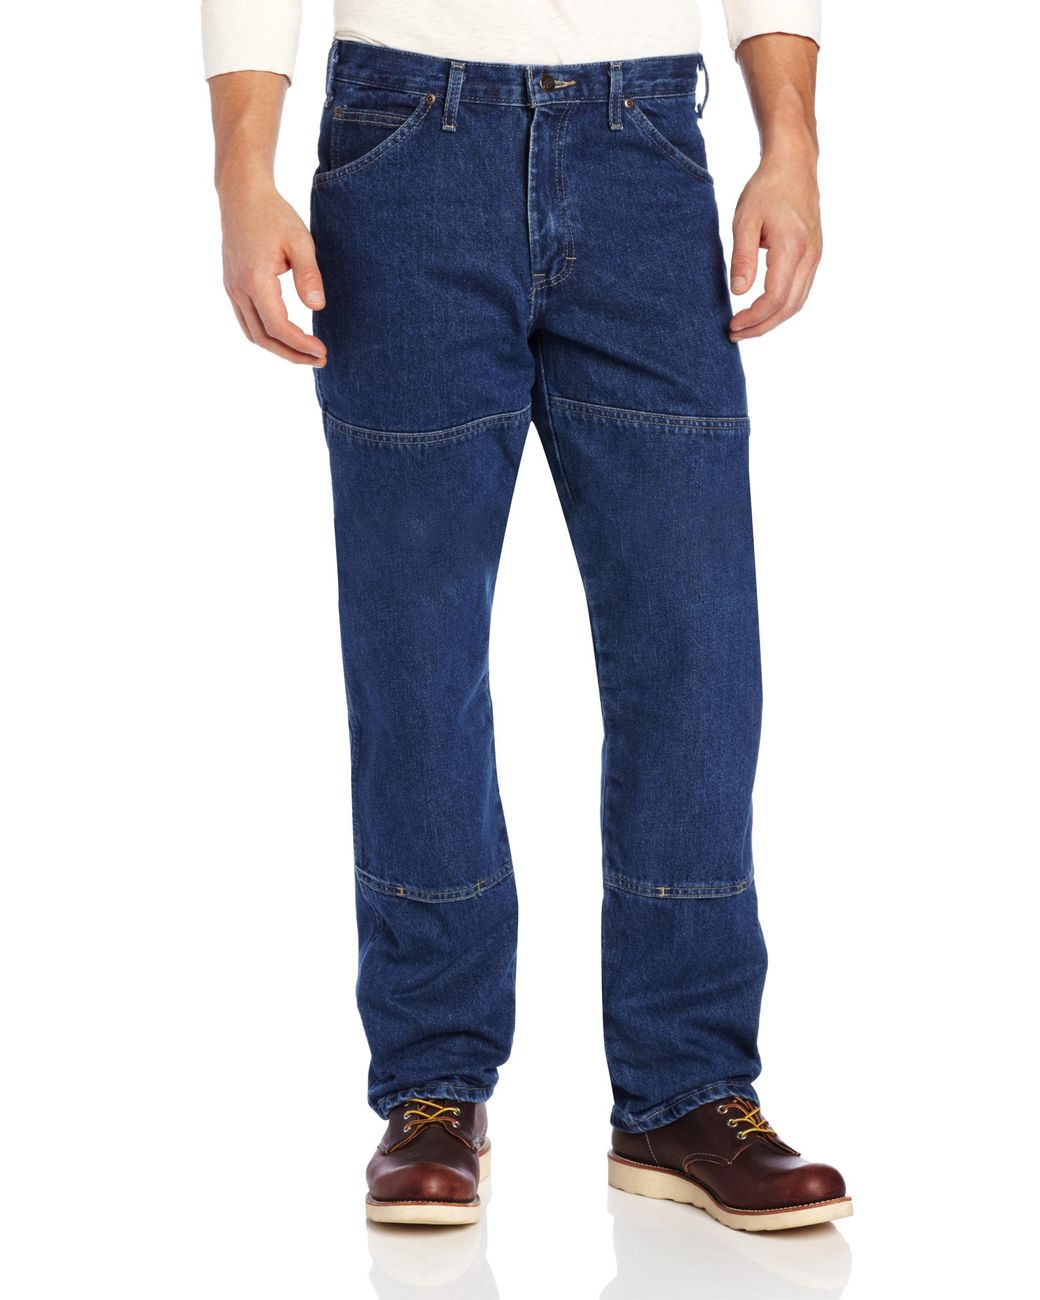 Dickies Denim Relaxed Fit Workhorse Jean in Stone Washed Indigo Blue ...